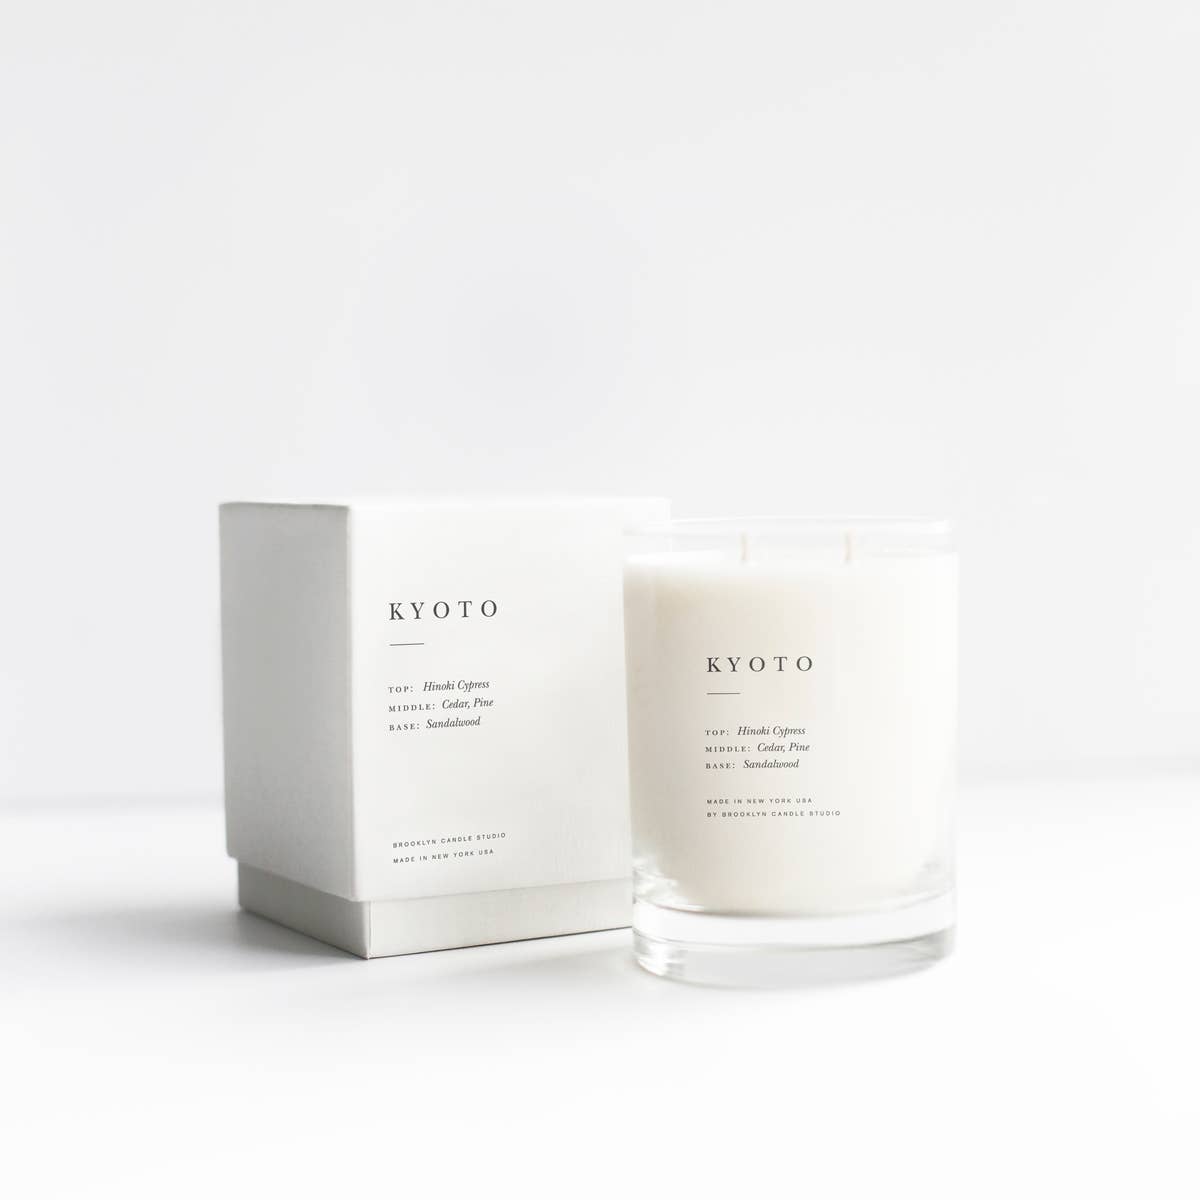 Kyoto Escapist Candle by Brooklyn Candle Studio